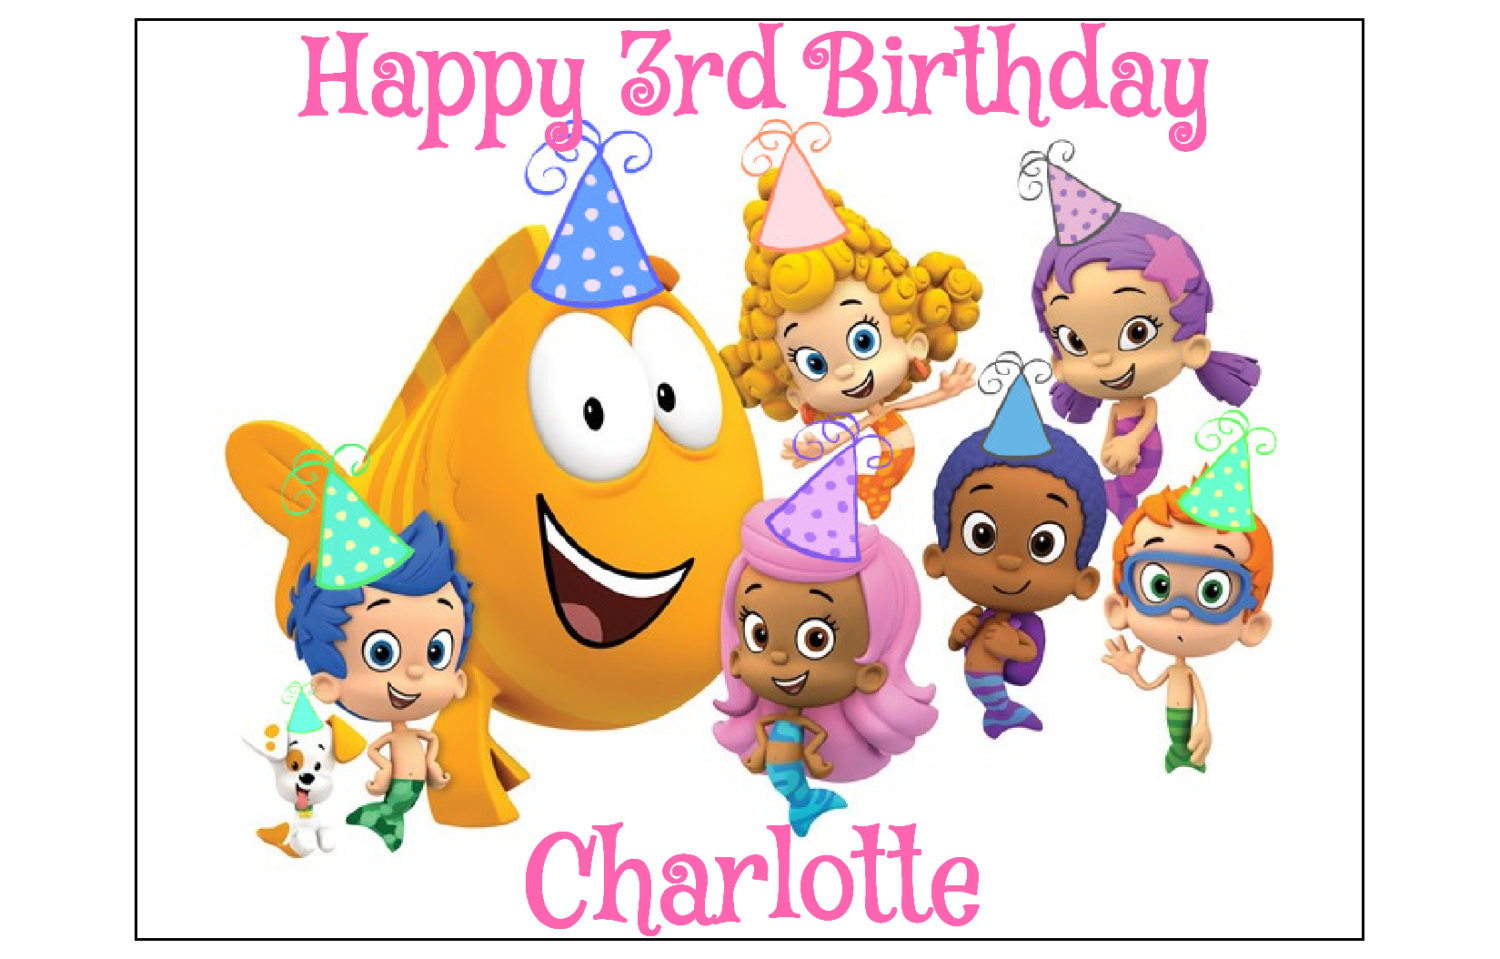 Bubble Guppies Birthday Cake Toppers
 Bubble Guppies EDIBLE cake topper decoration party birthday